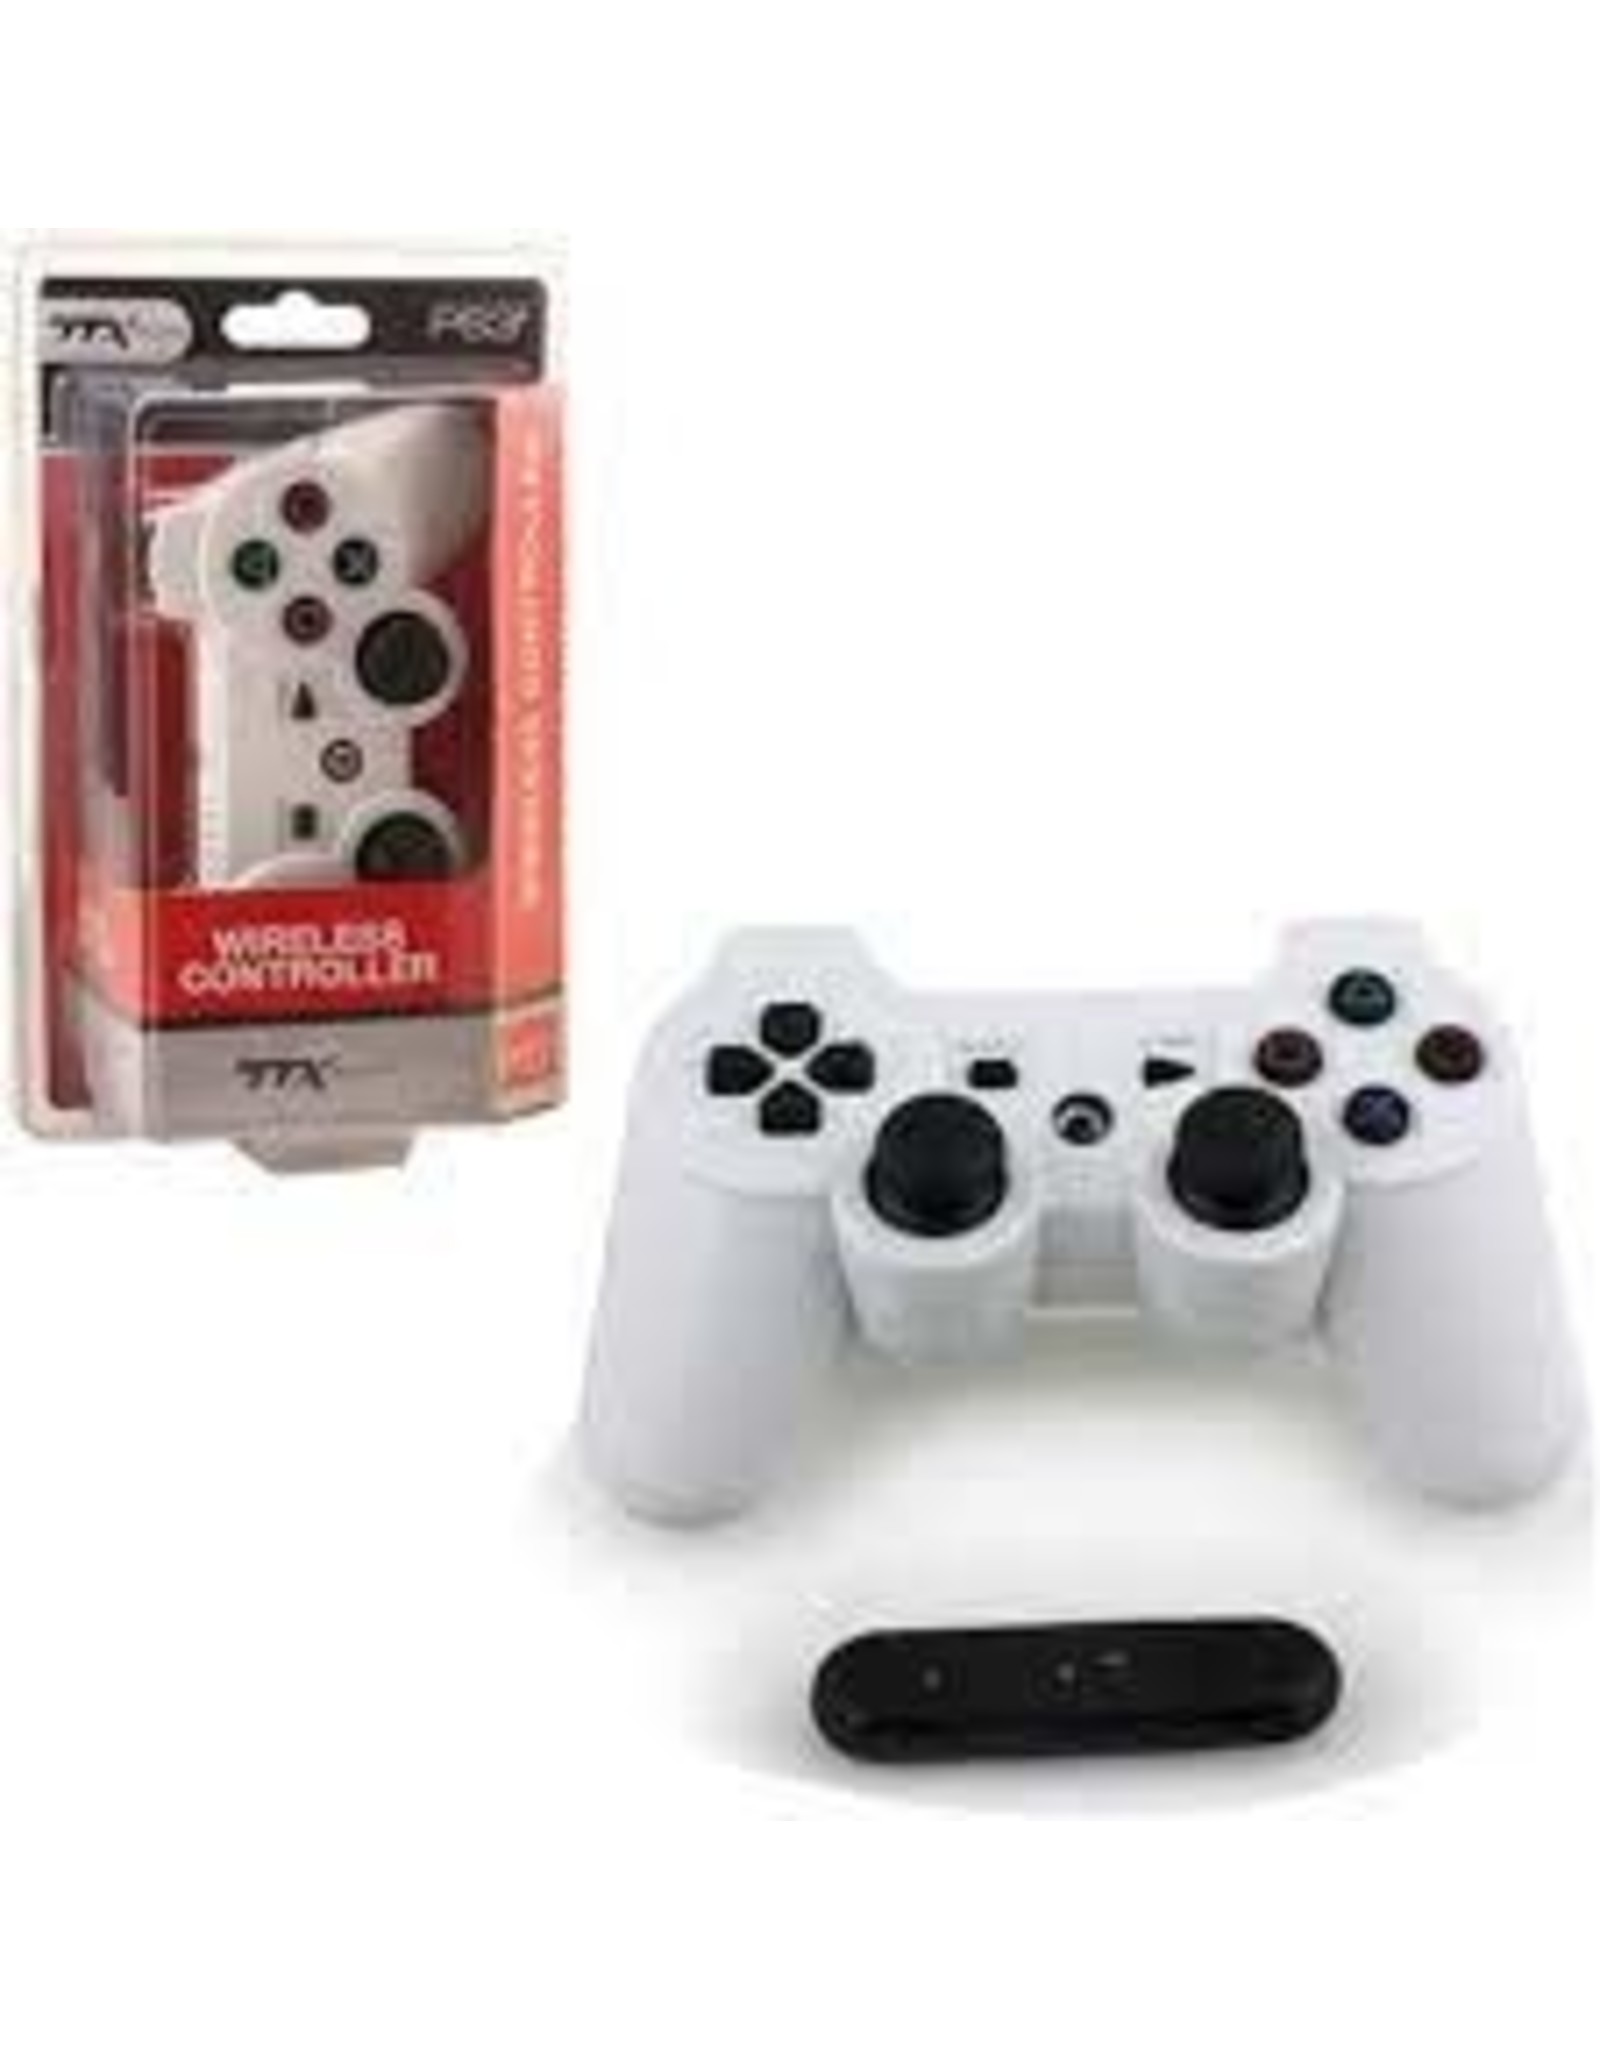 Playstation 3 PS3 Playstation 3 Wireless Controller - White, TTX (Brand New)